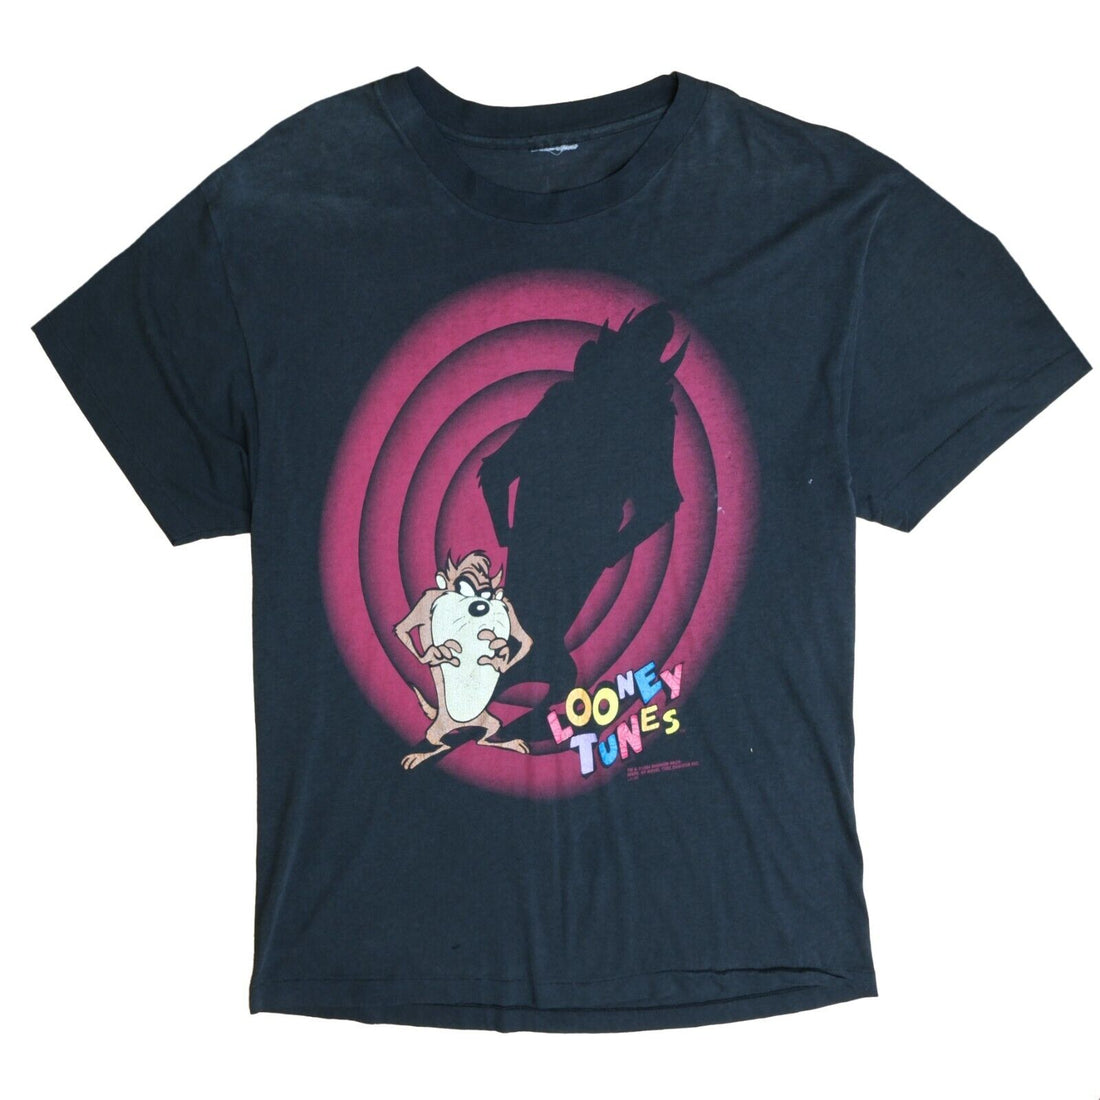 Vintage Taz Looney Tunes Shadow T-Shirt Size Large 1994 90s